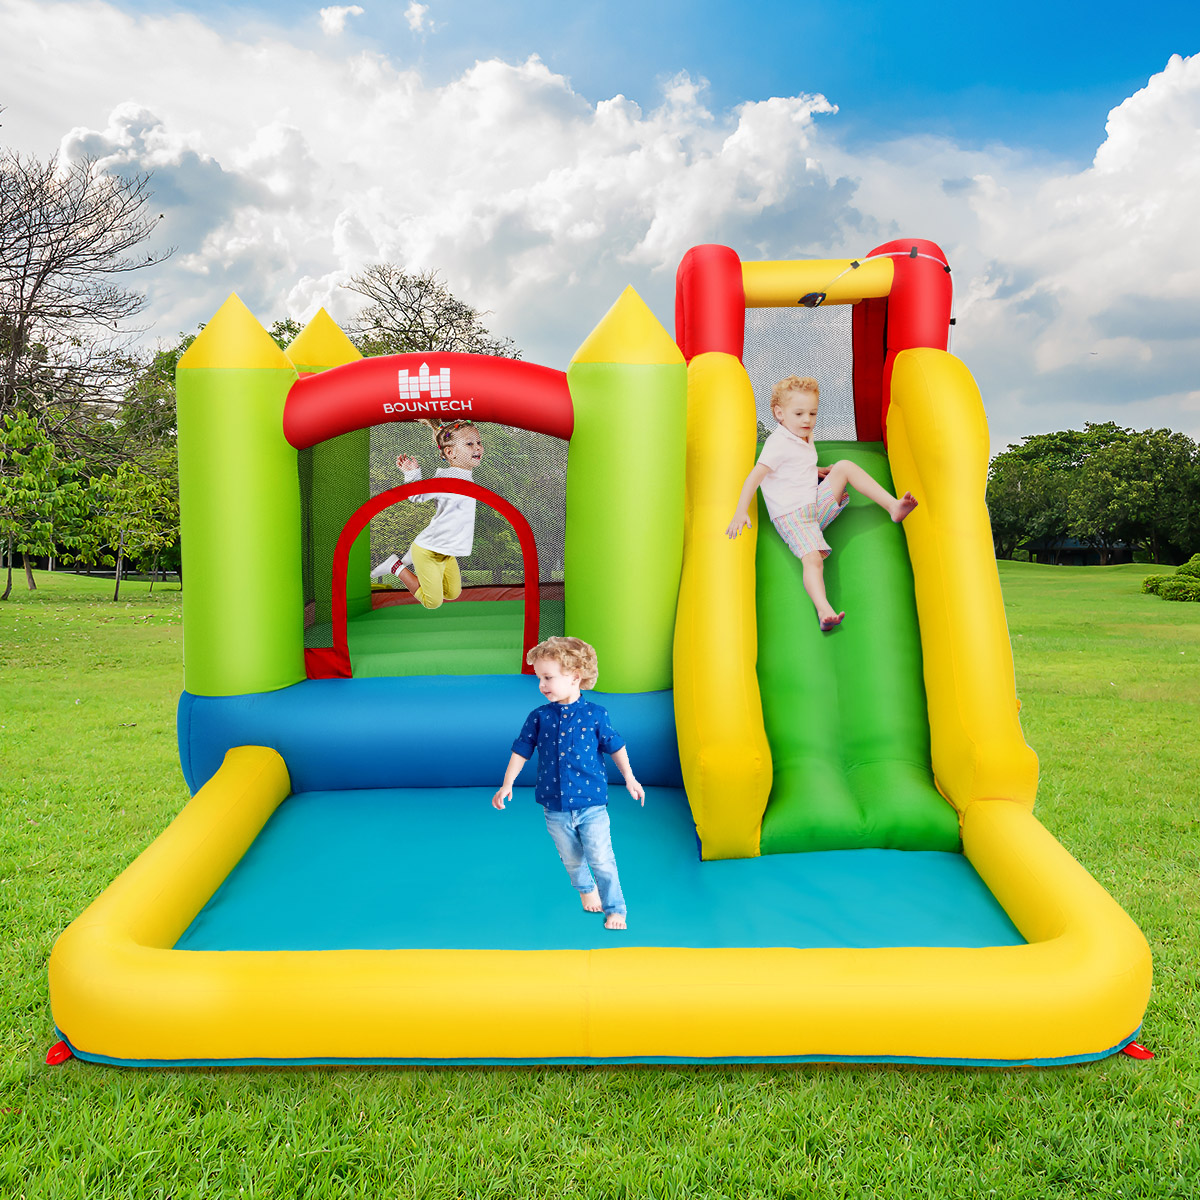 Costway Inflatable Bounce House Water Slide Jump Bouncer Climbing Wall Splash Pool Blower Excluded - image 4 of 10